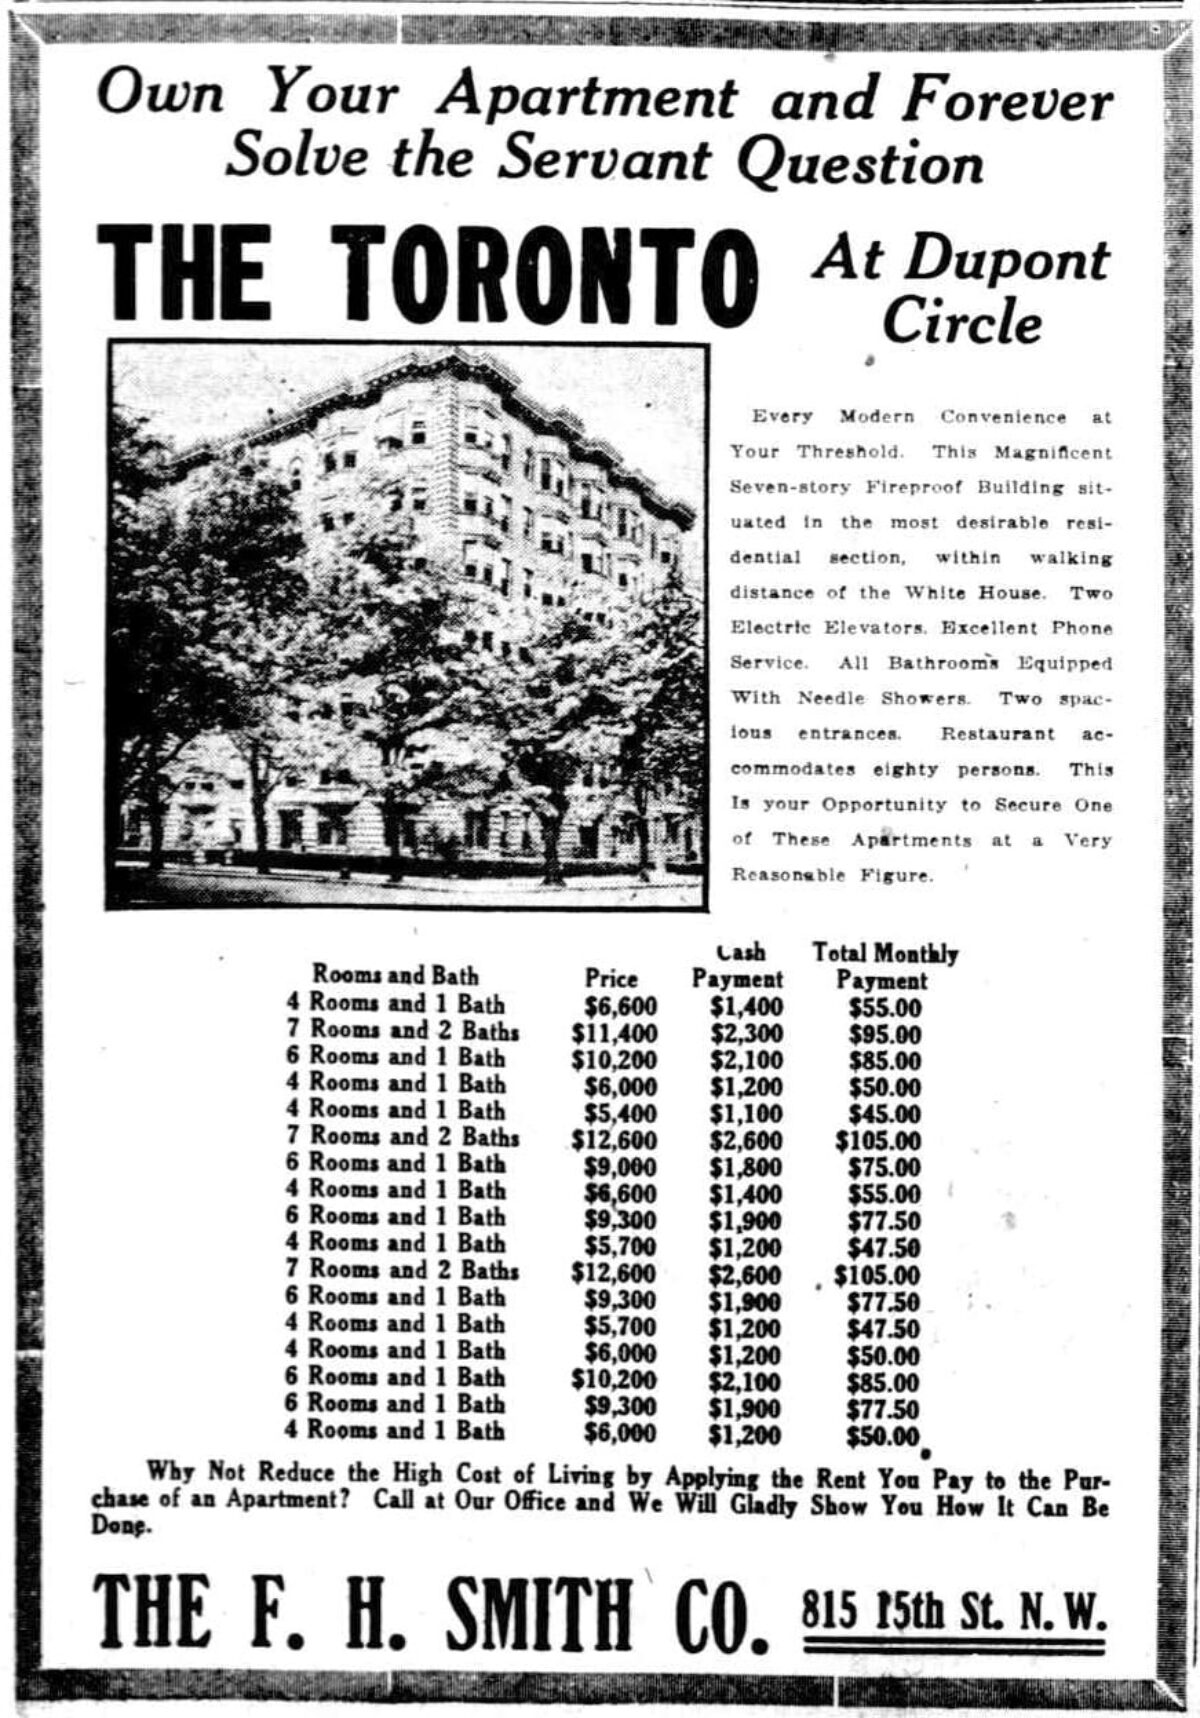 Living Off Dupont Circle for $45/Month in 1920: The Toronto Story